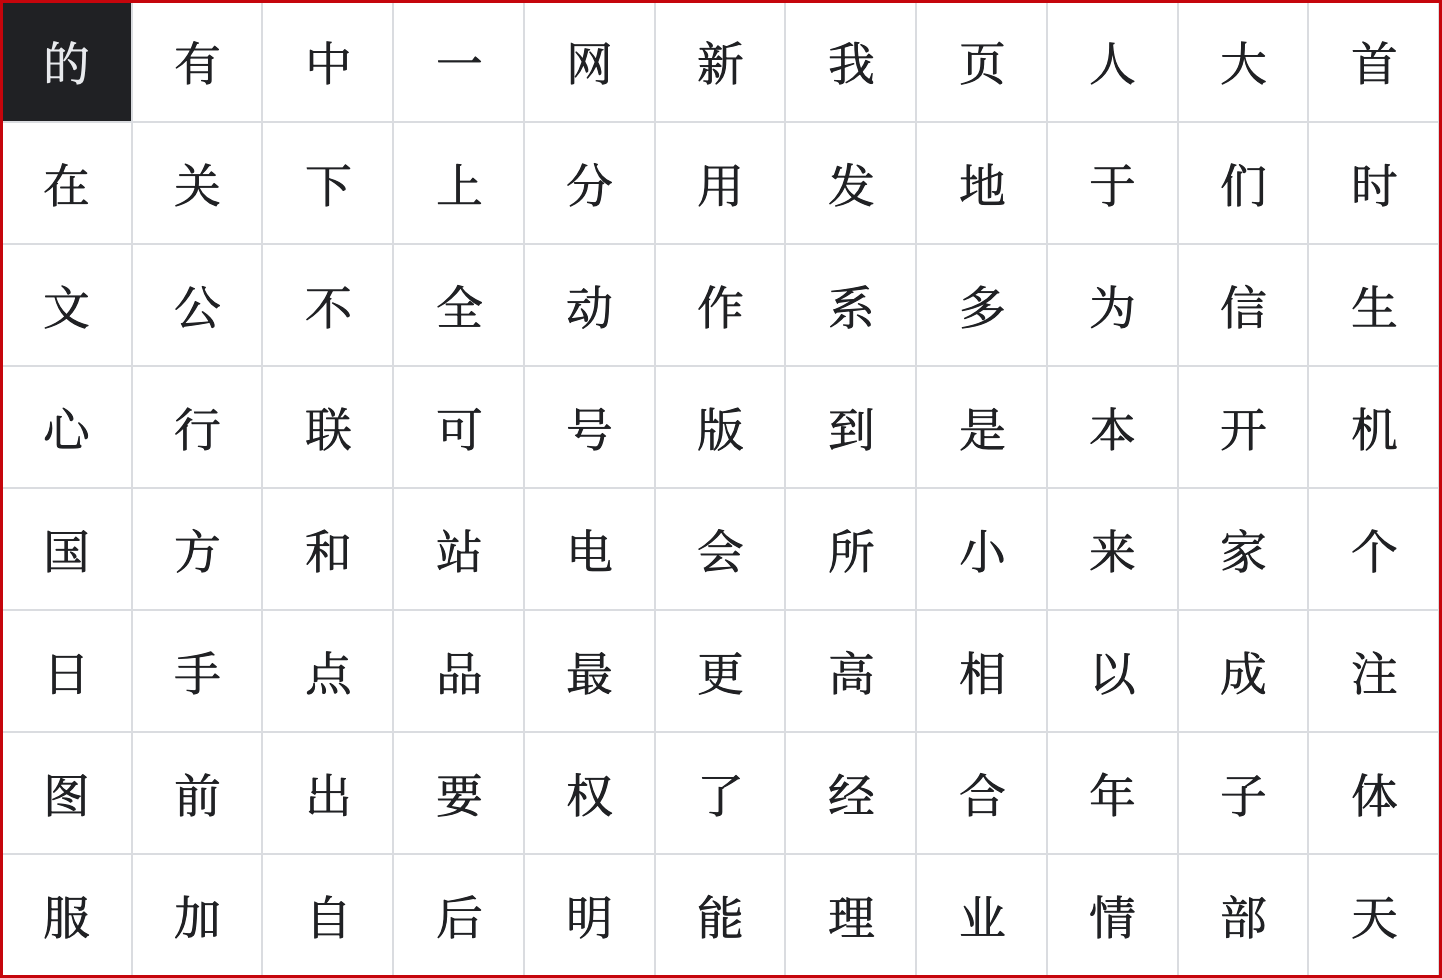 Chinese characters shown in Noto Serif Simplified Chinese font